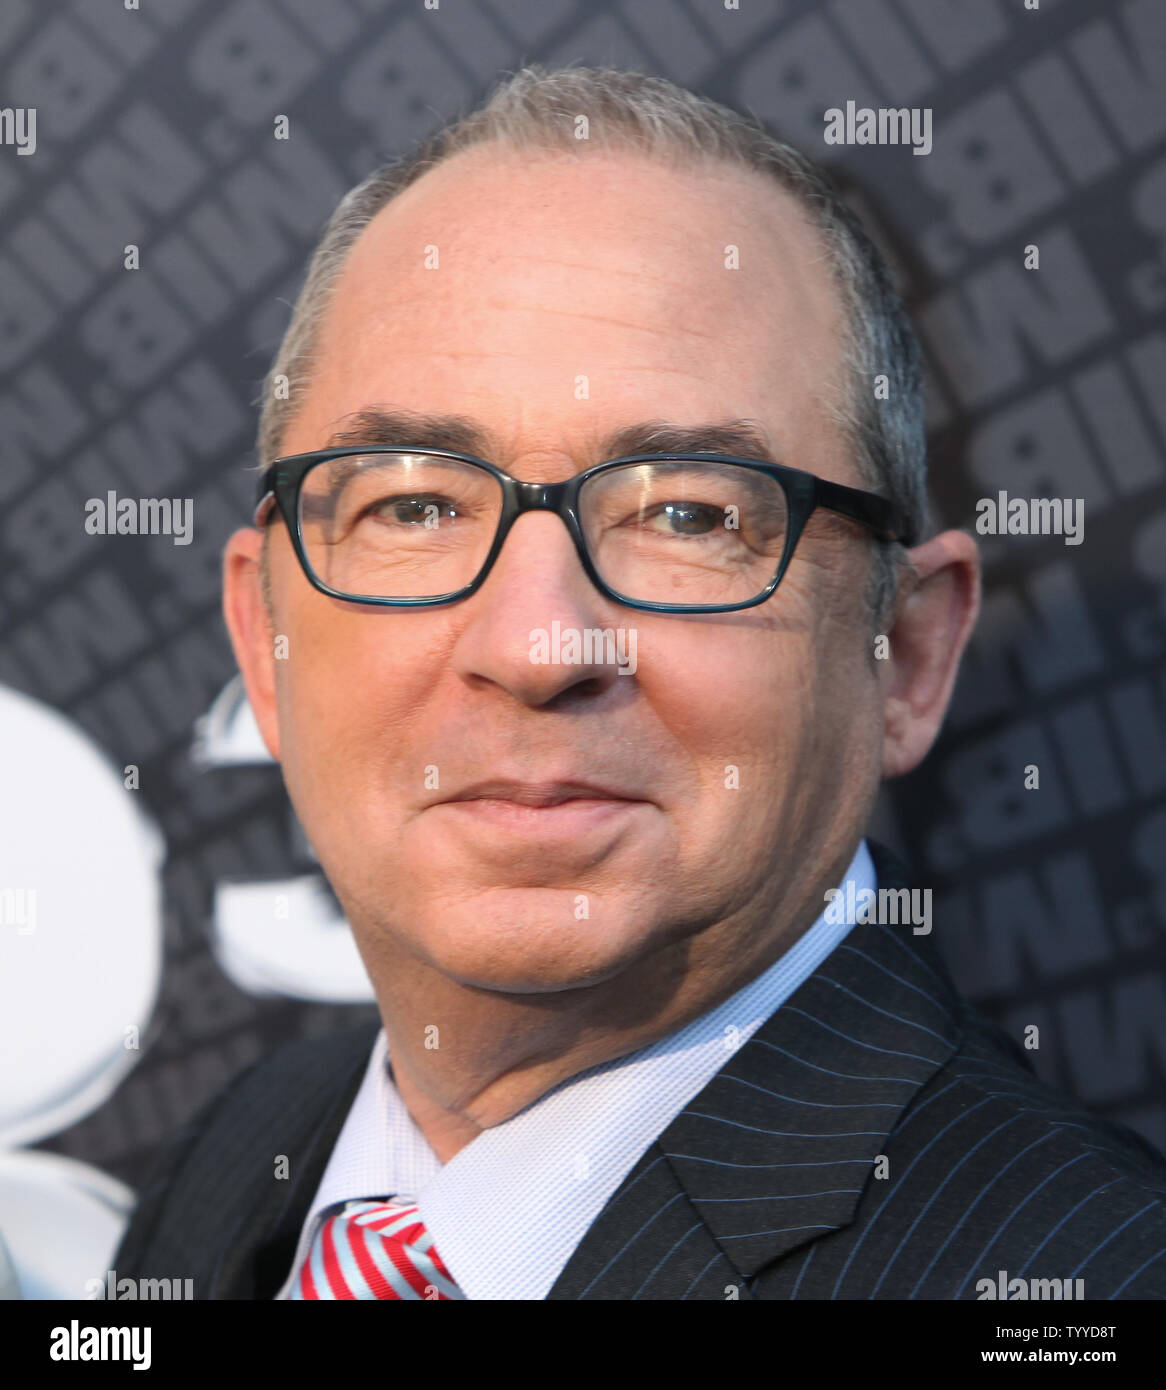 Barry Sonnenfeld arrives for the European premiere of the film 'Men in Black 3' in Paris on May 11, 2012.     UPI/David Silpa. Stock Photo